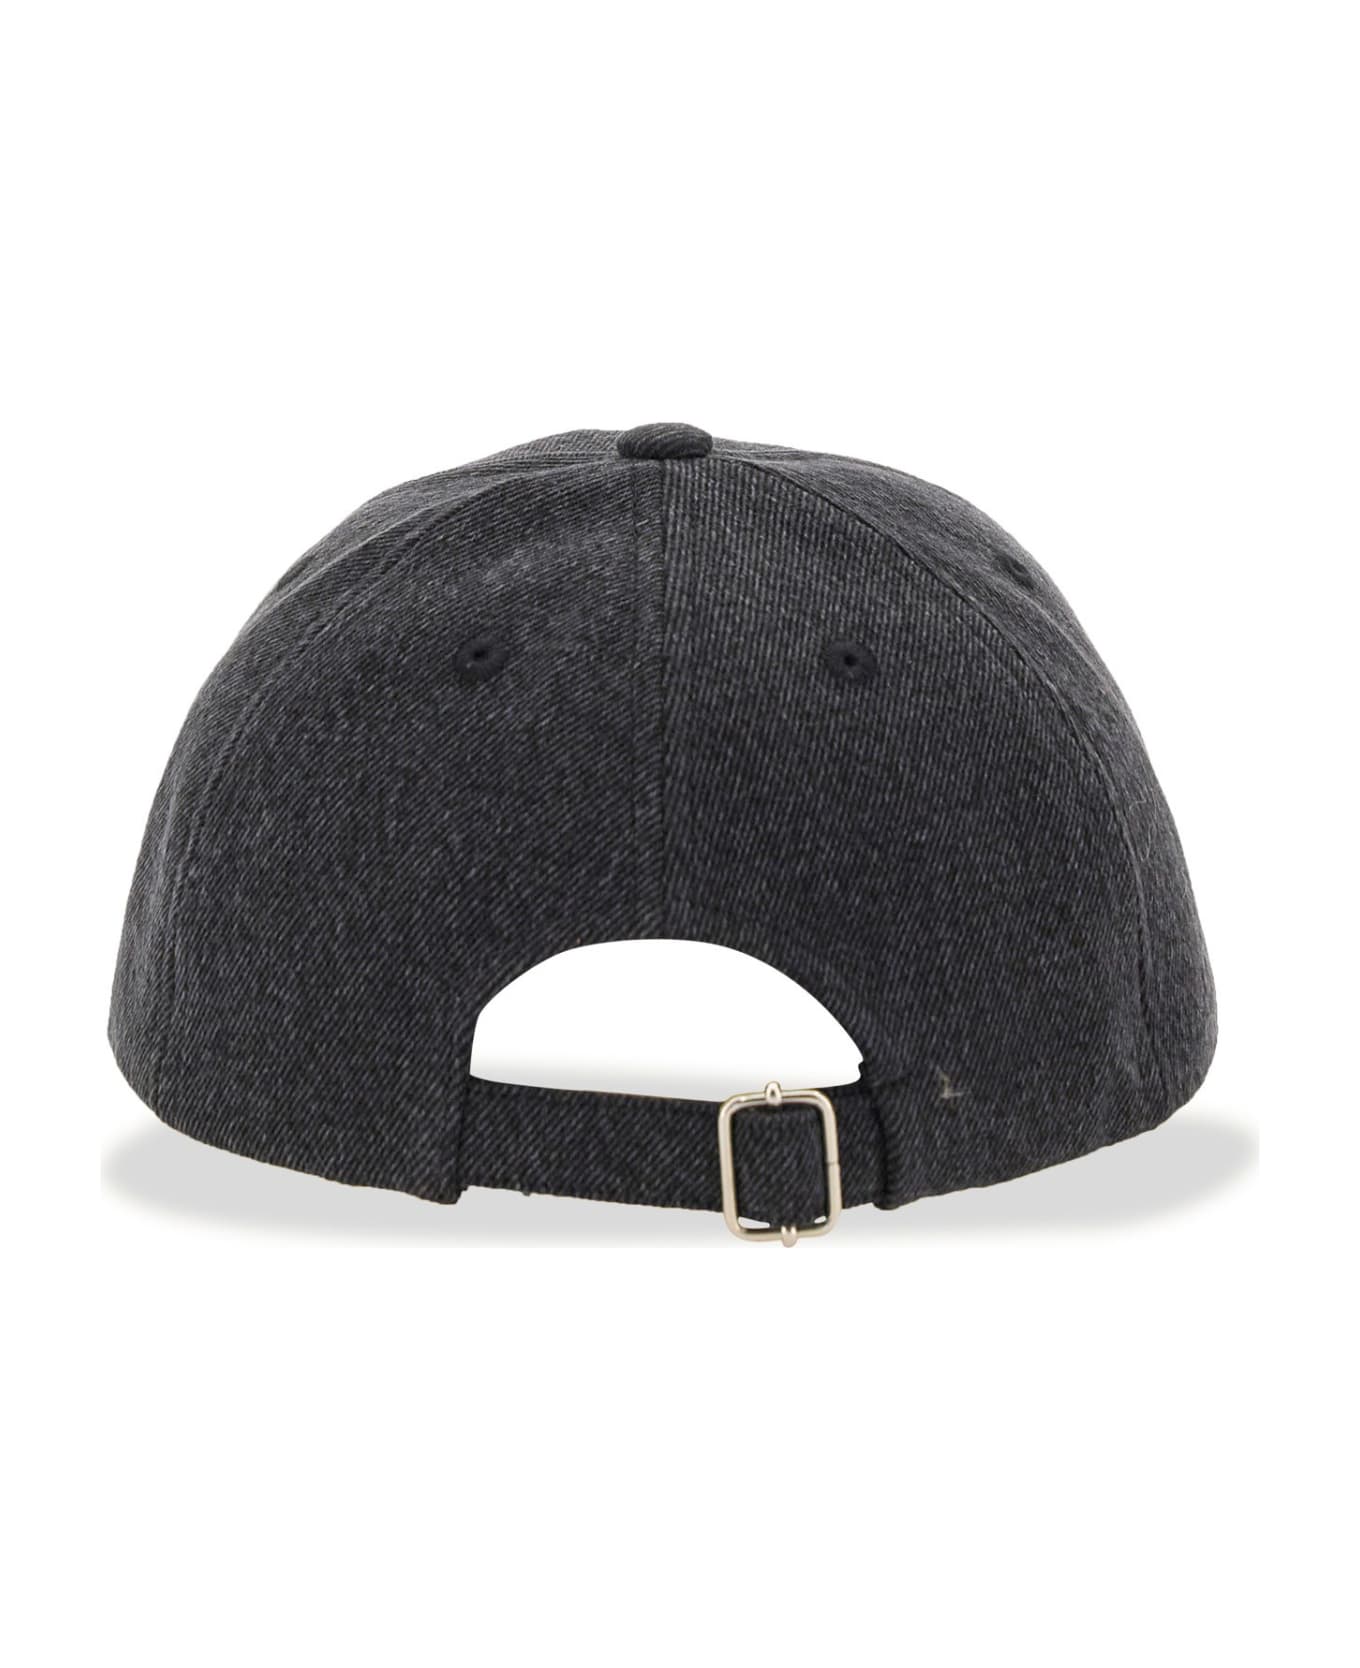 A.P.C. Baseball Hat With Logo - LZE